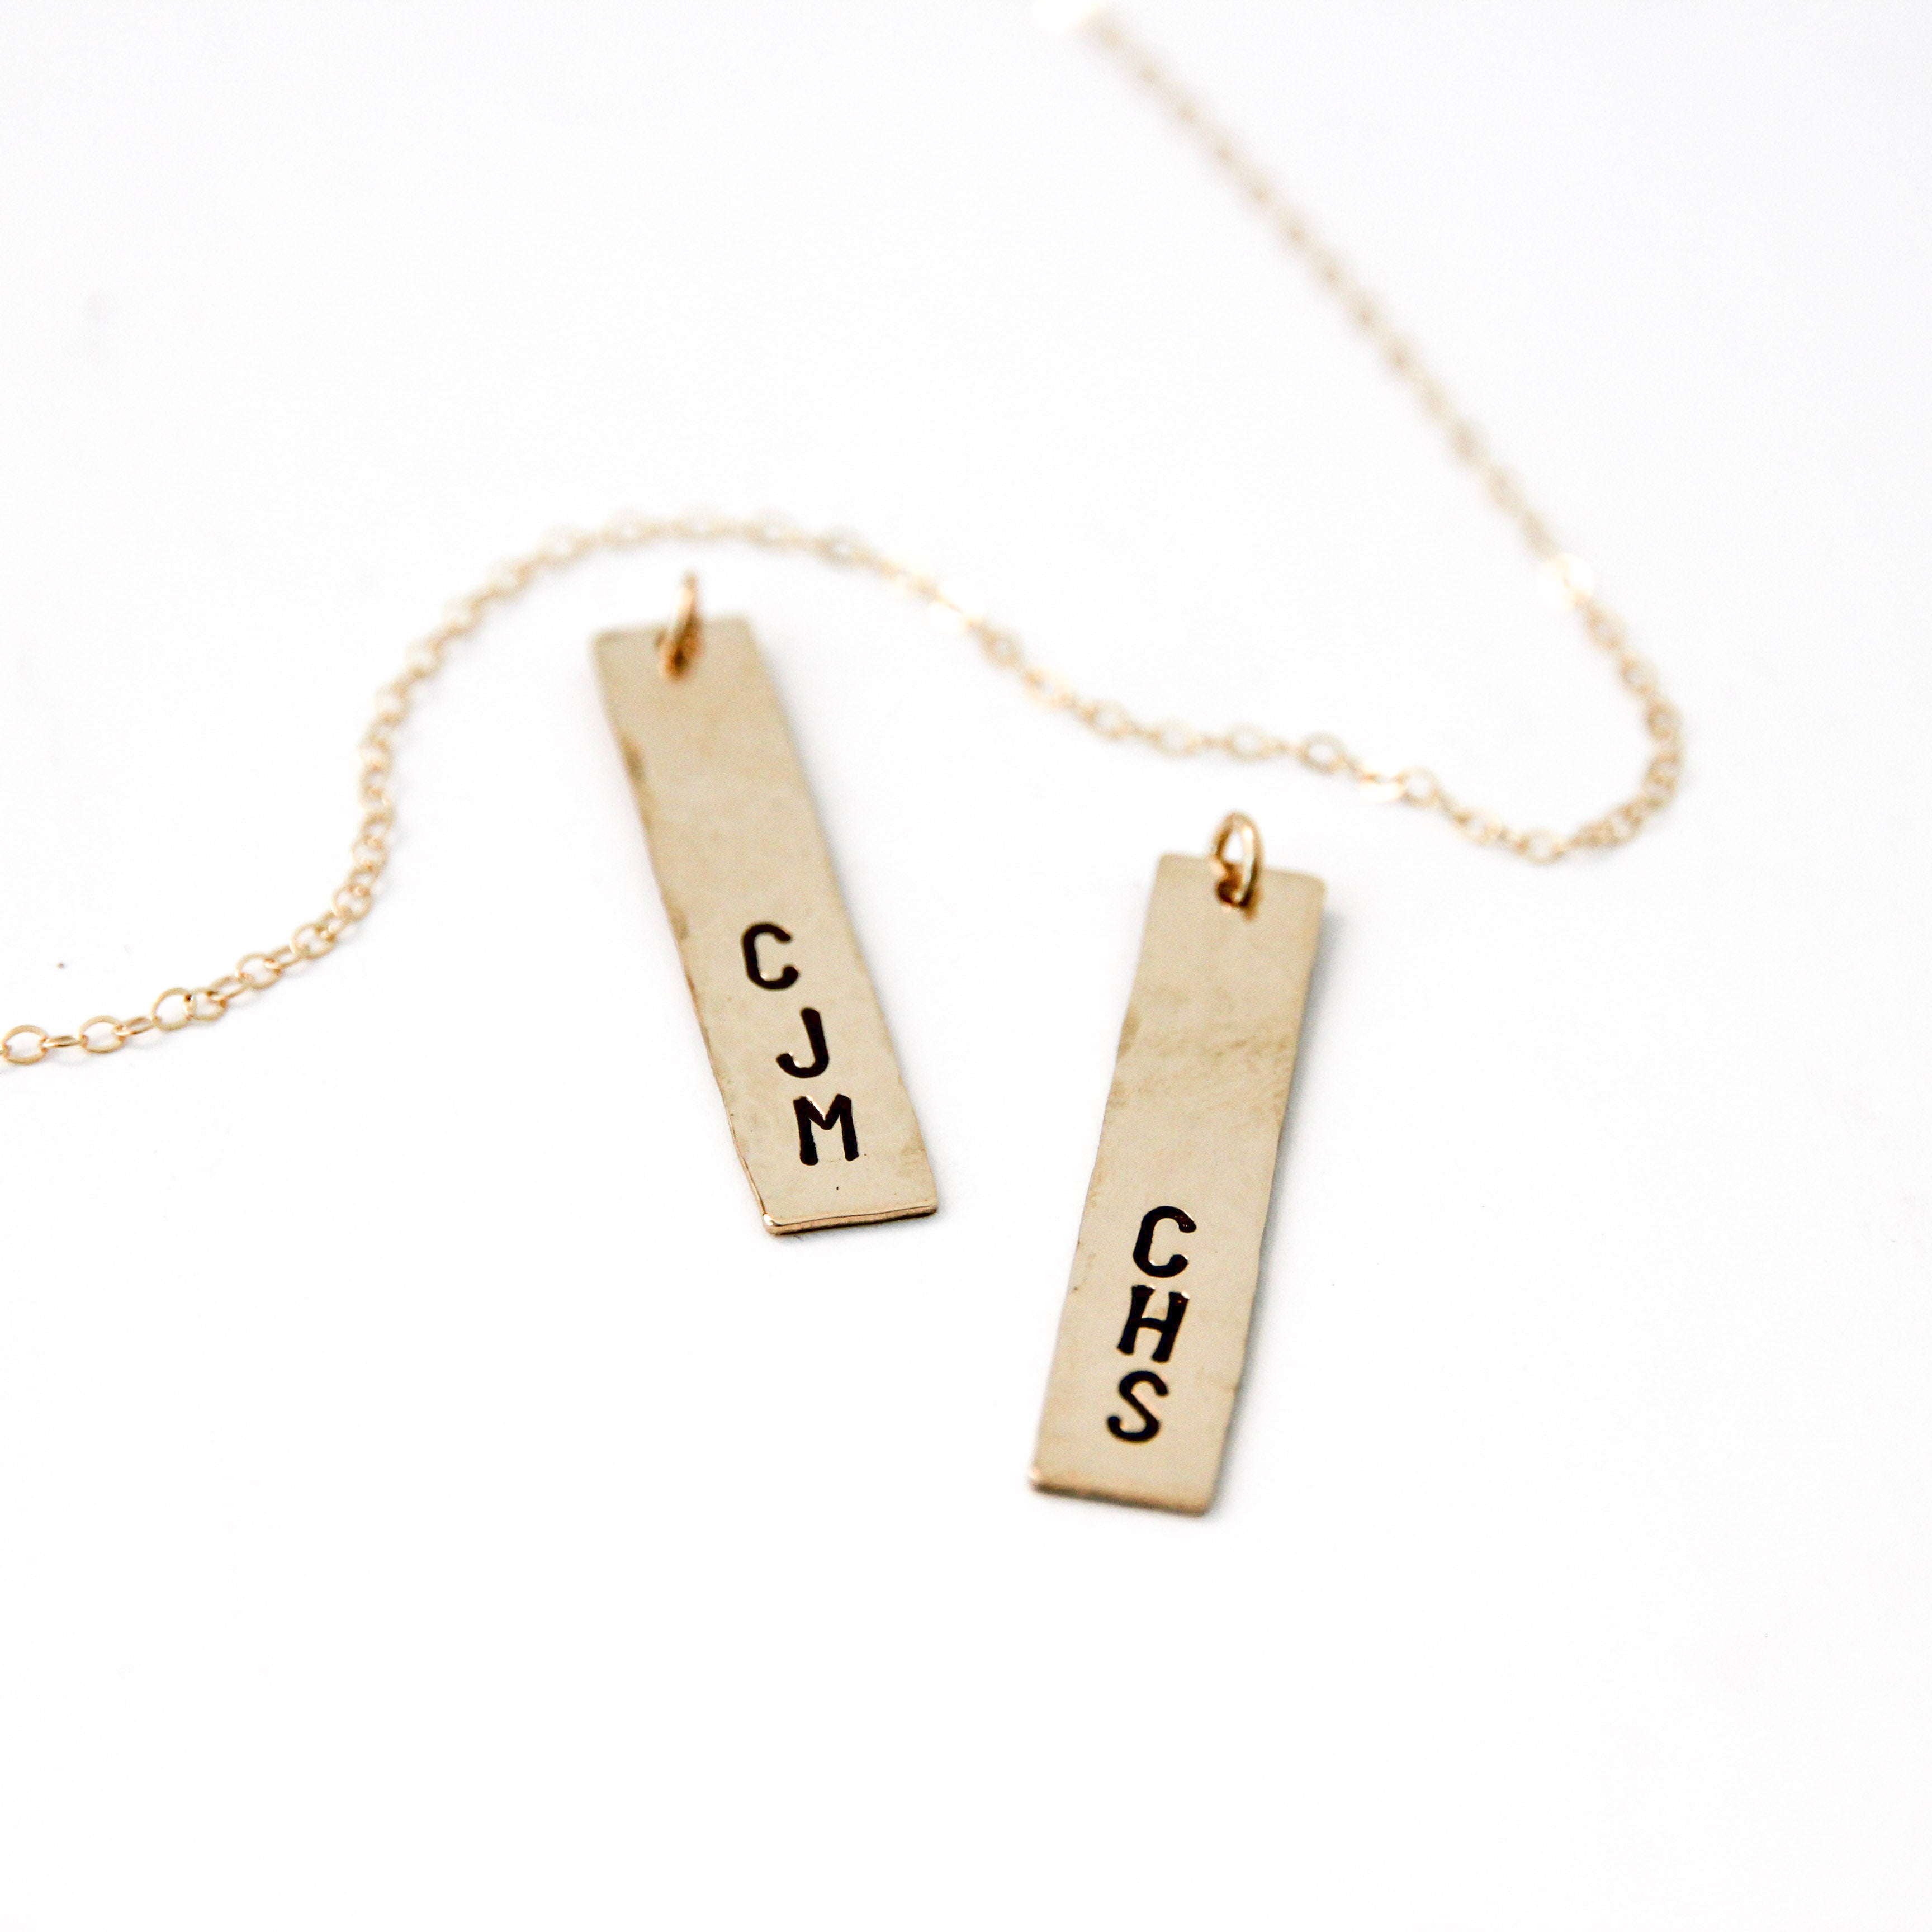 Two vertical gold bar charms with three letter stamped on both of them and a gold chain